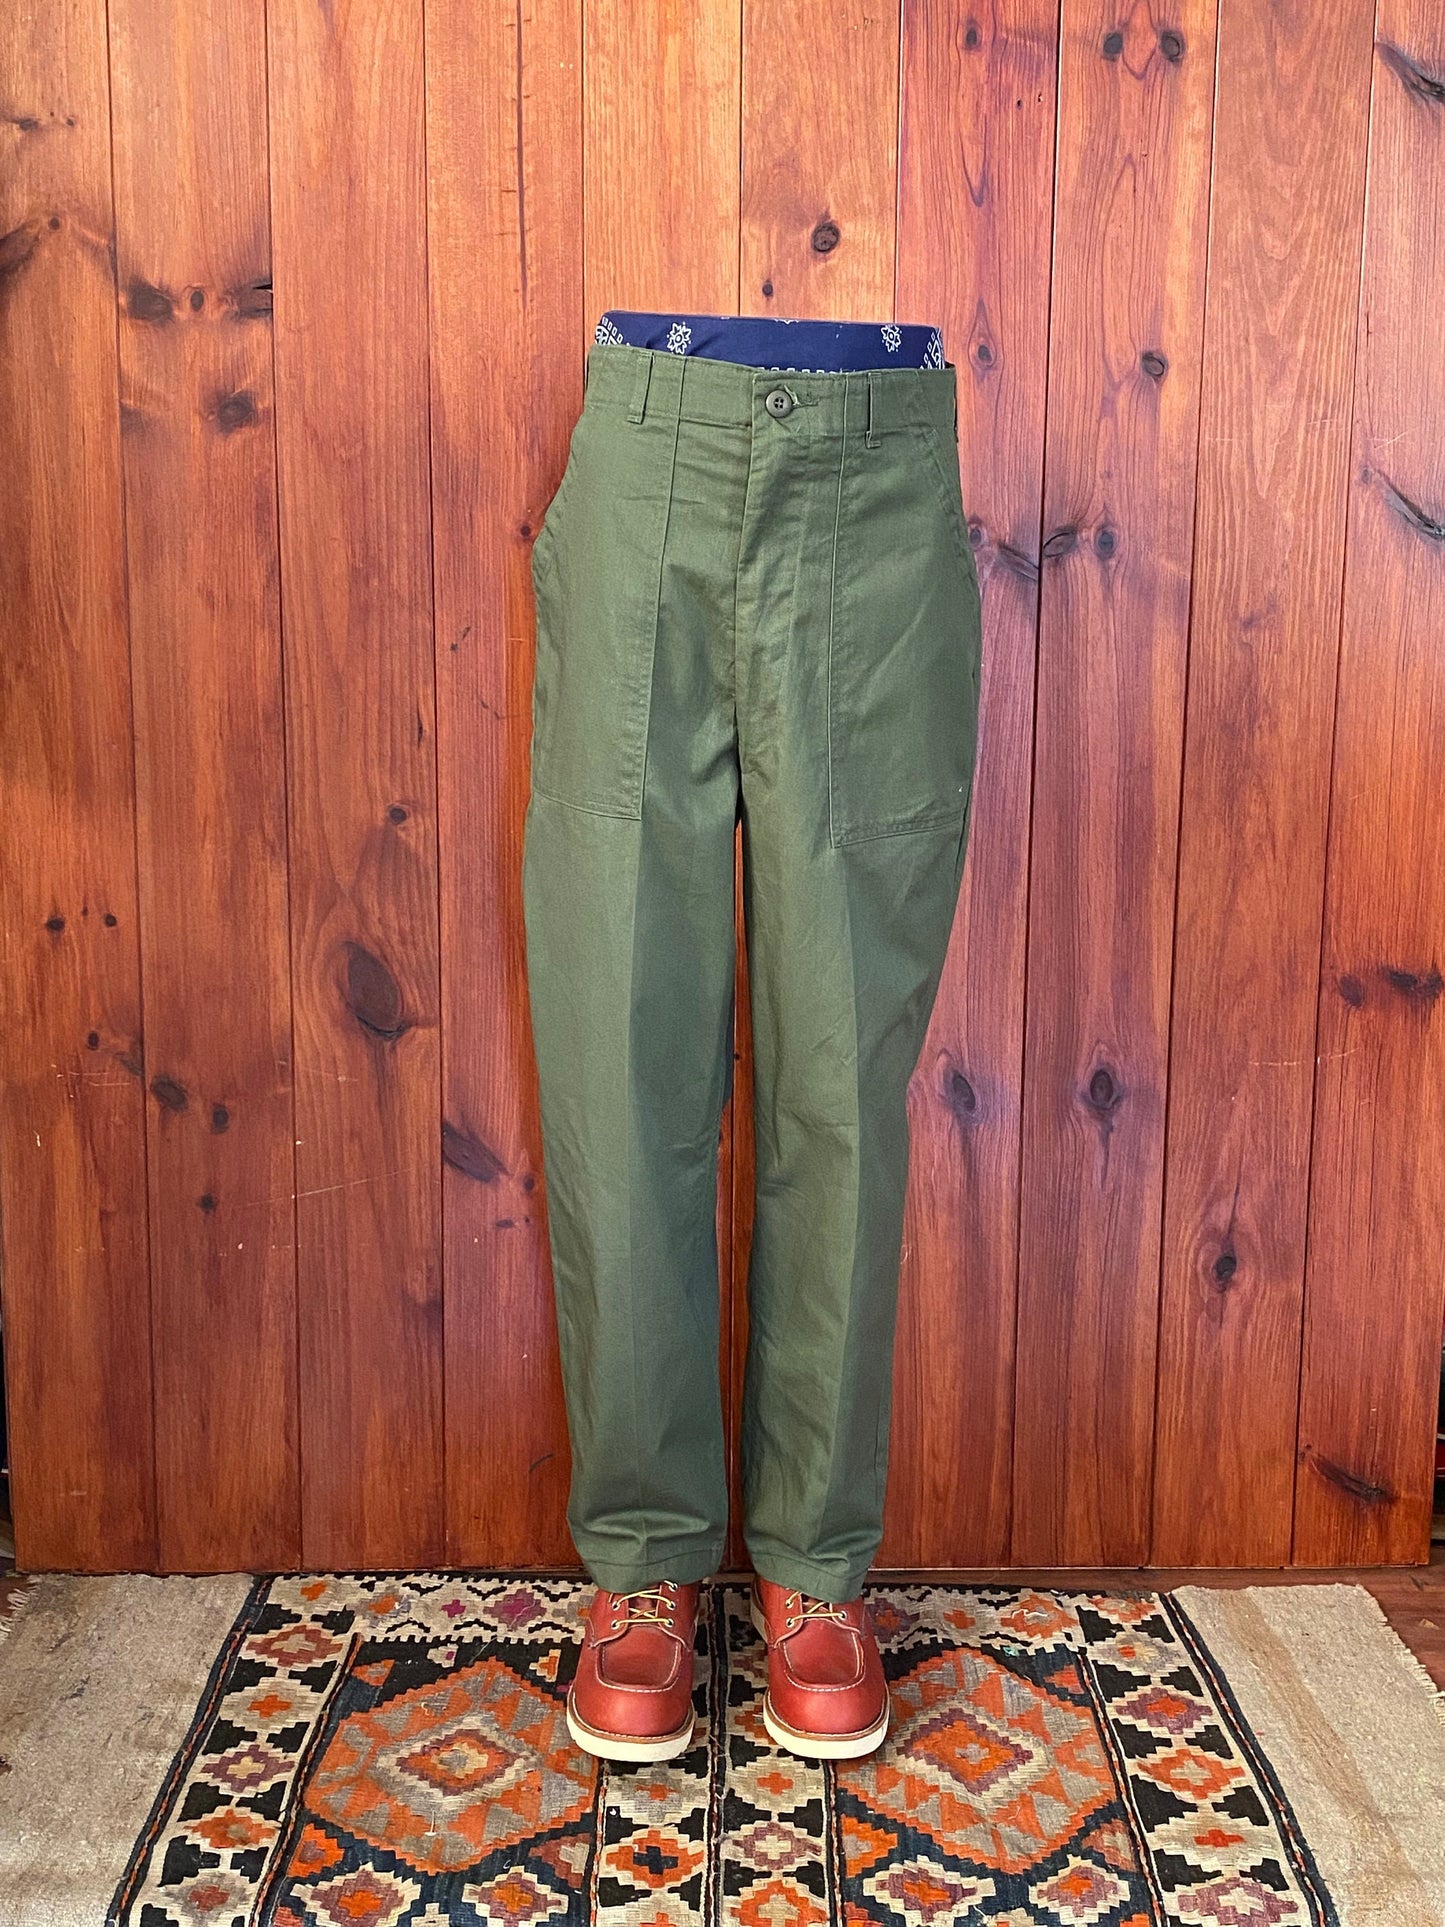 31X30 Authentic Vintage 1985 US Army OG-507 utility pants / Trousers fatigues